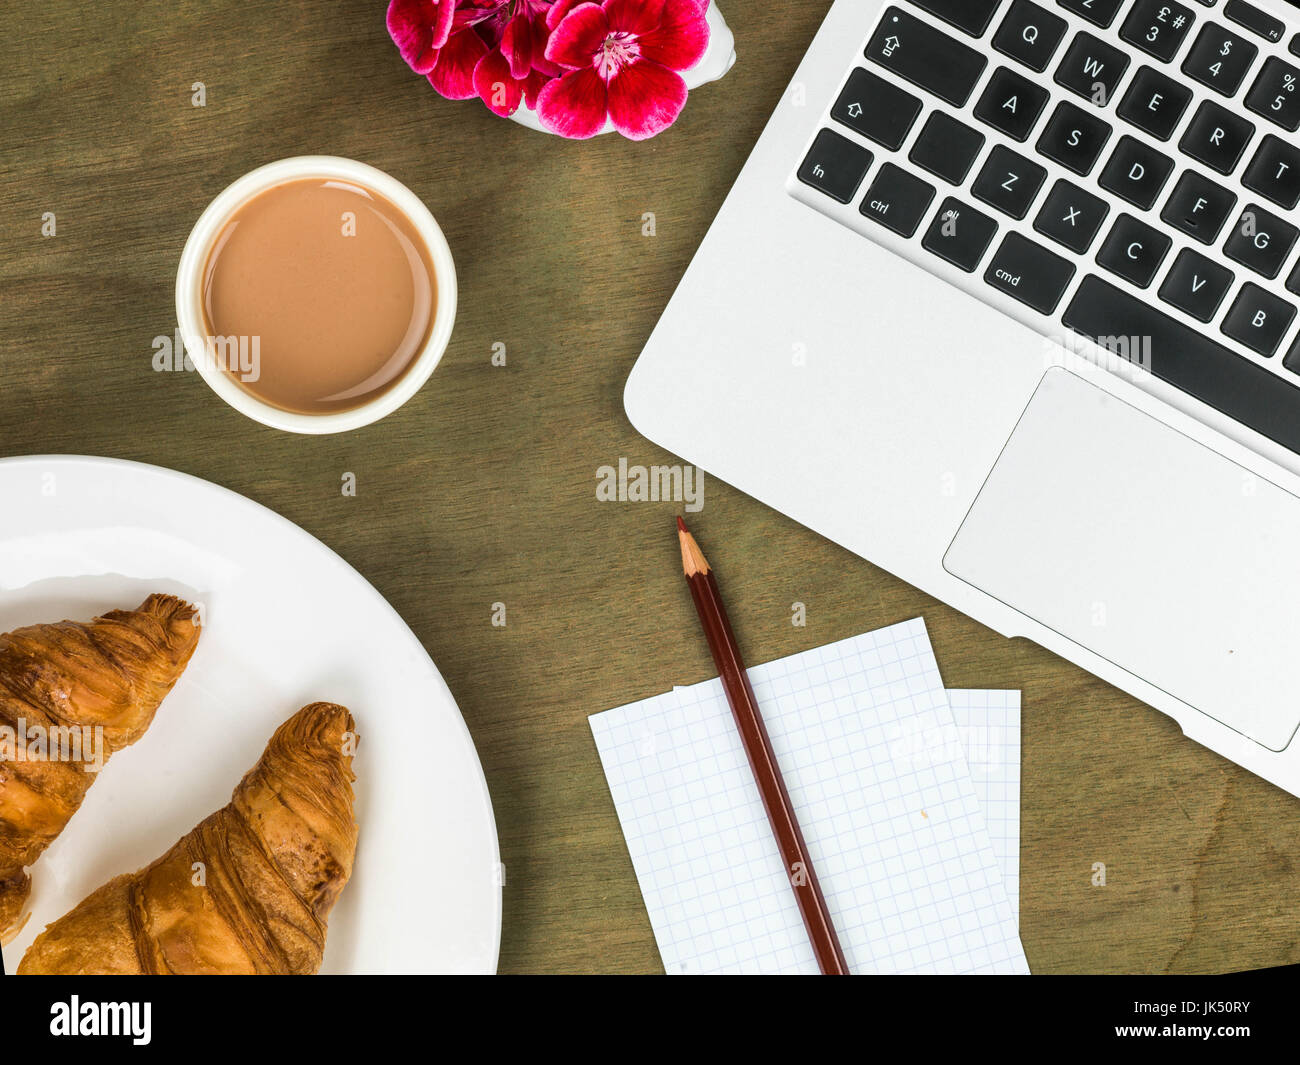 Croissant and a Cup of Tea Working Breakfast or Snack On A Wooden Distressed Desk Top Stock Photo